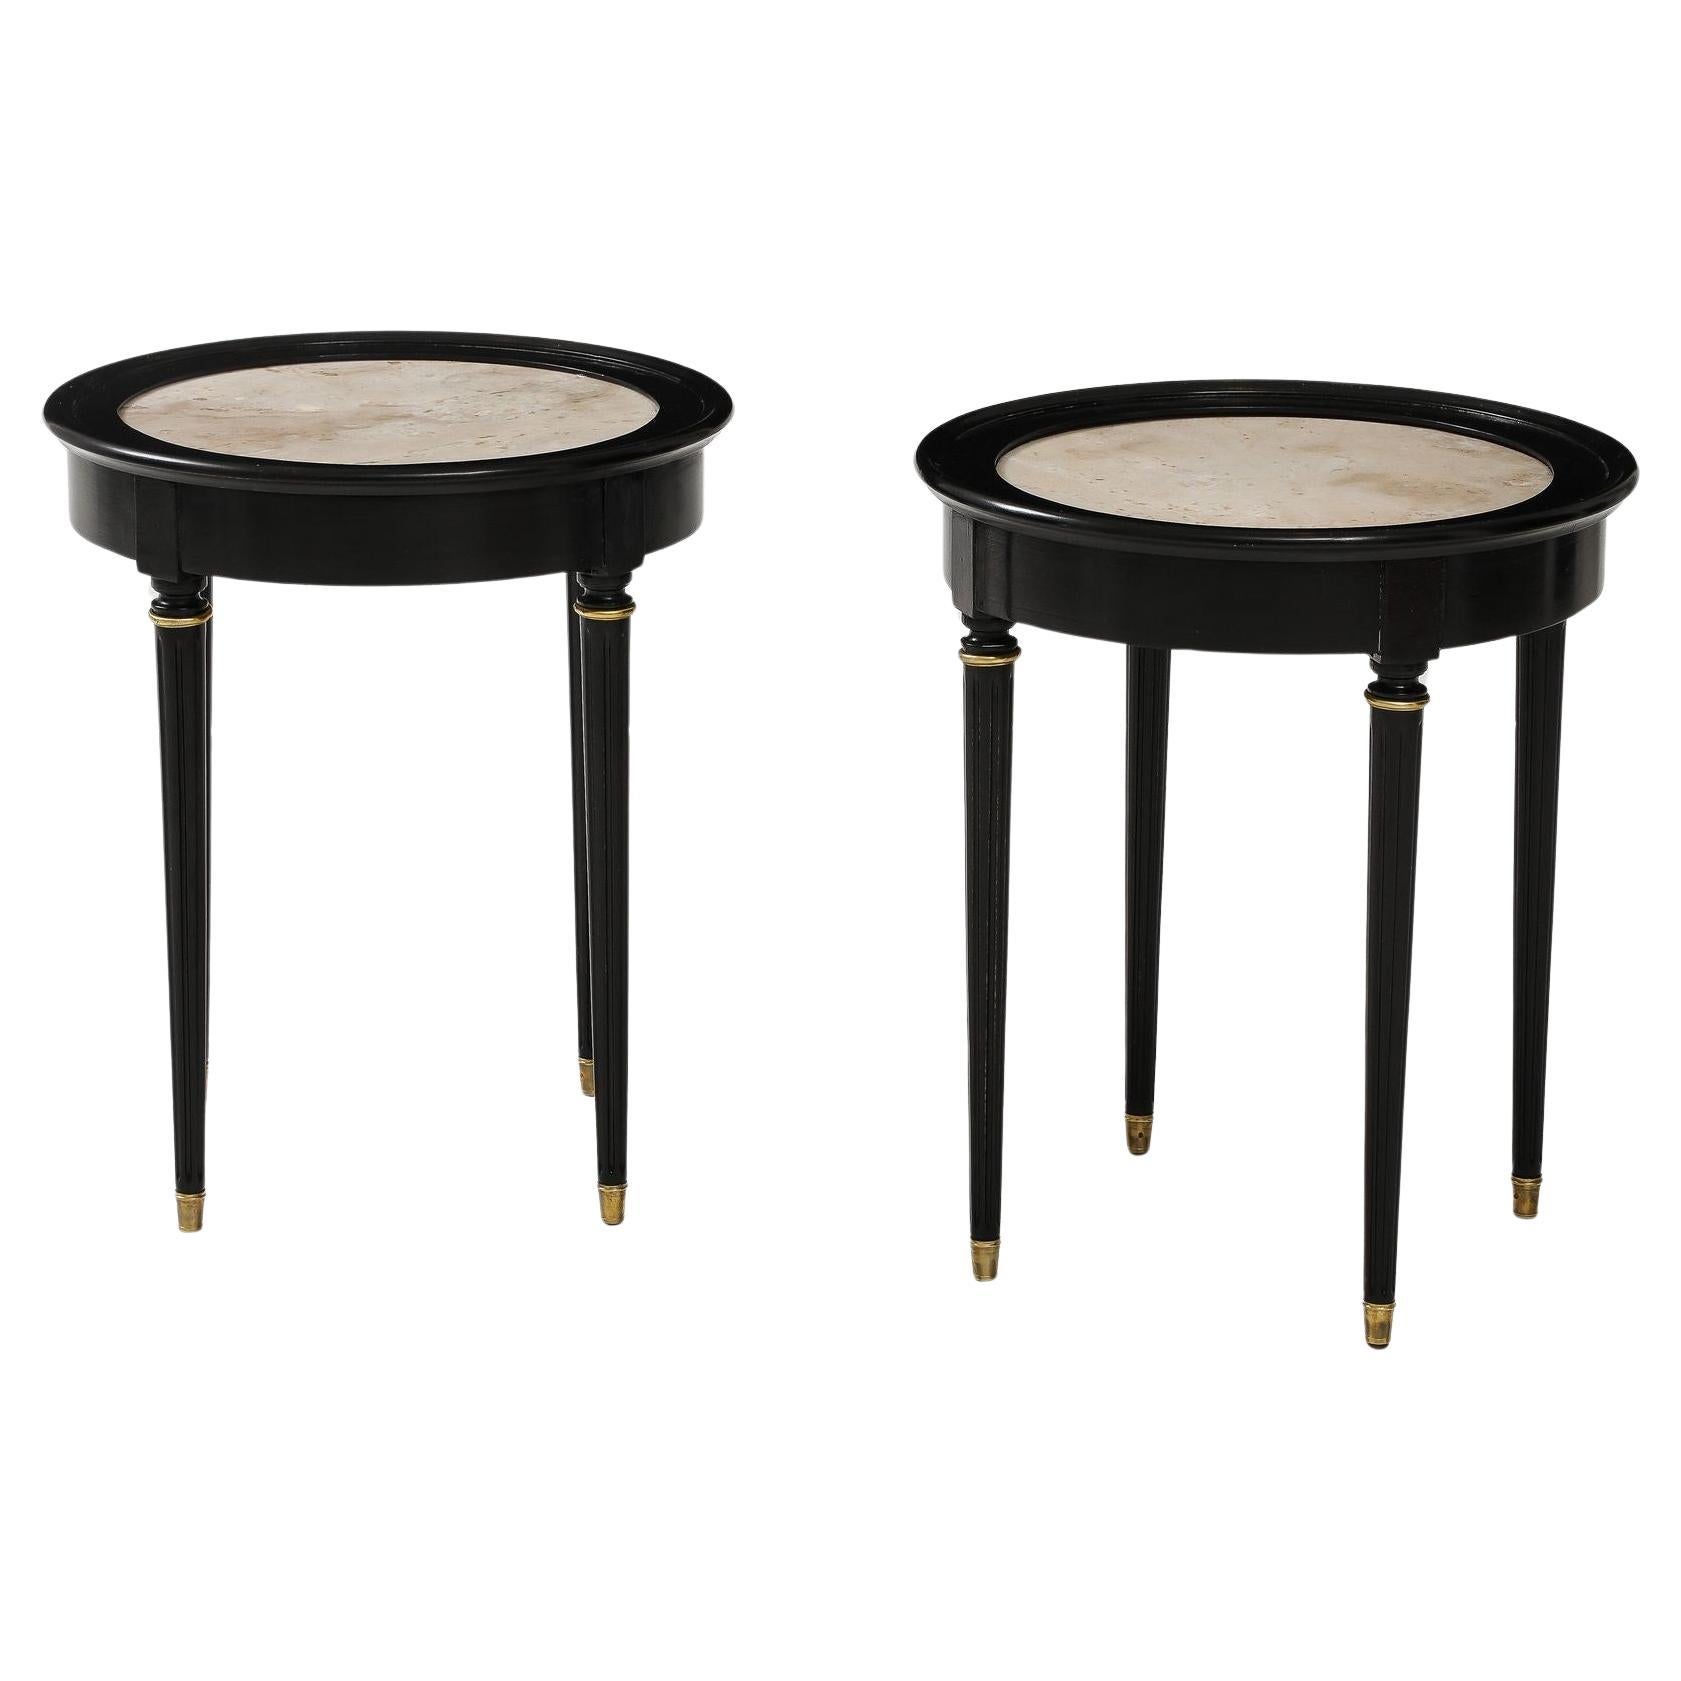 A great Pair of Black Lacquer Marble Top Circular Side Tables For Sale